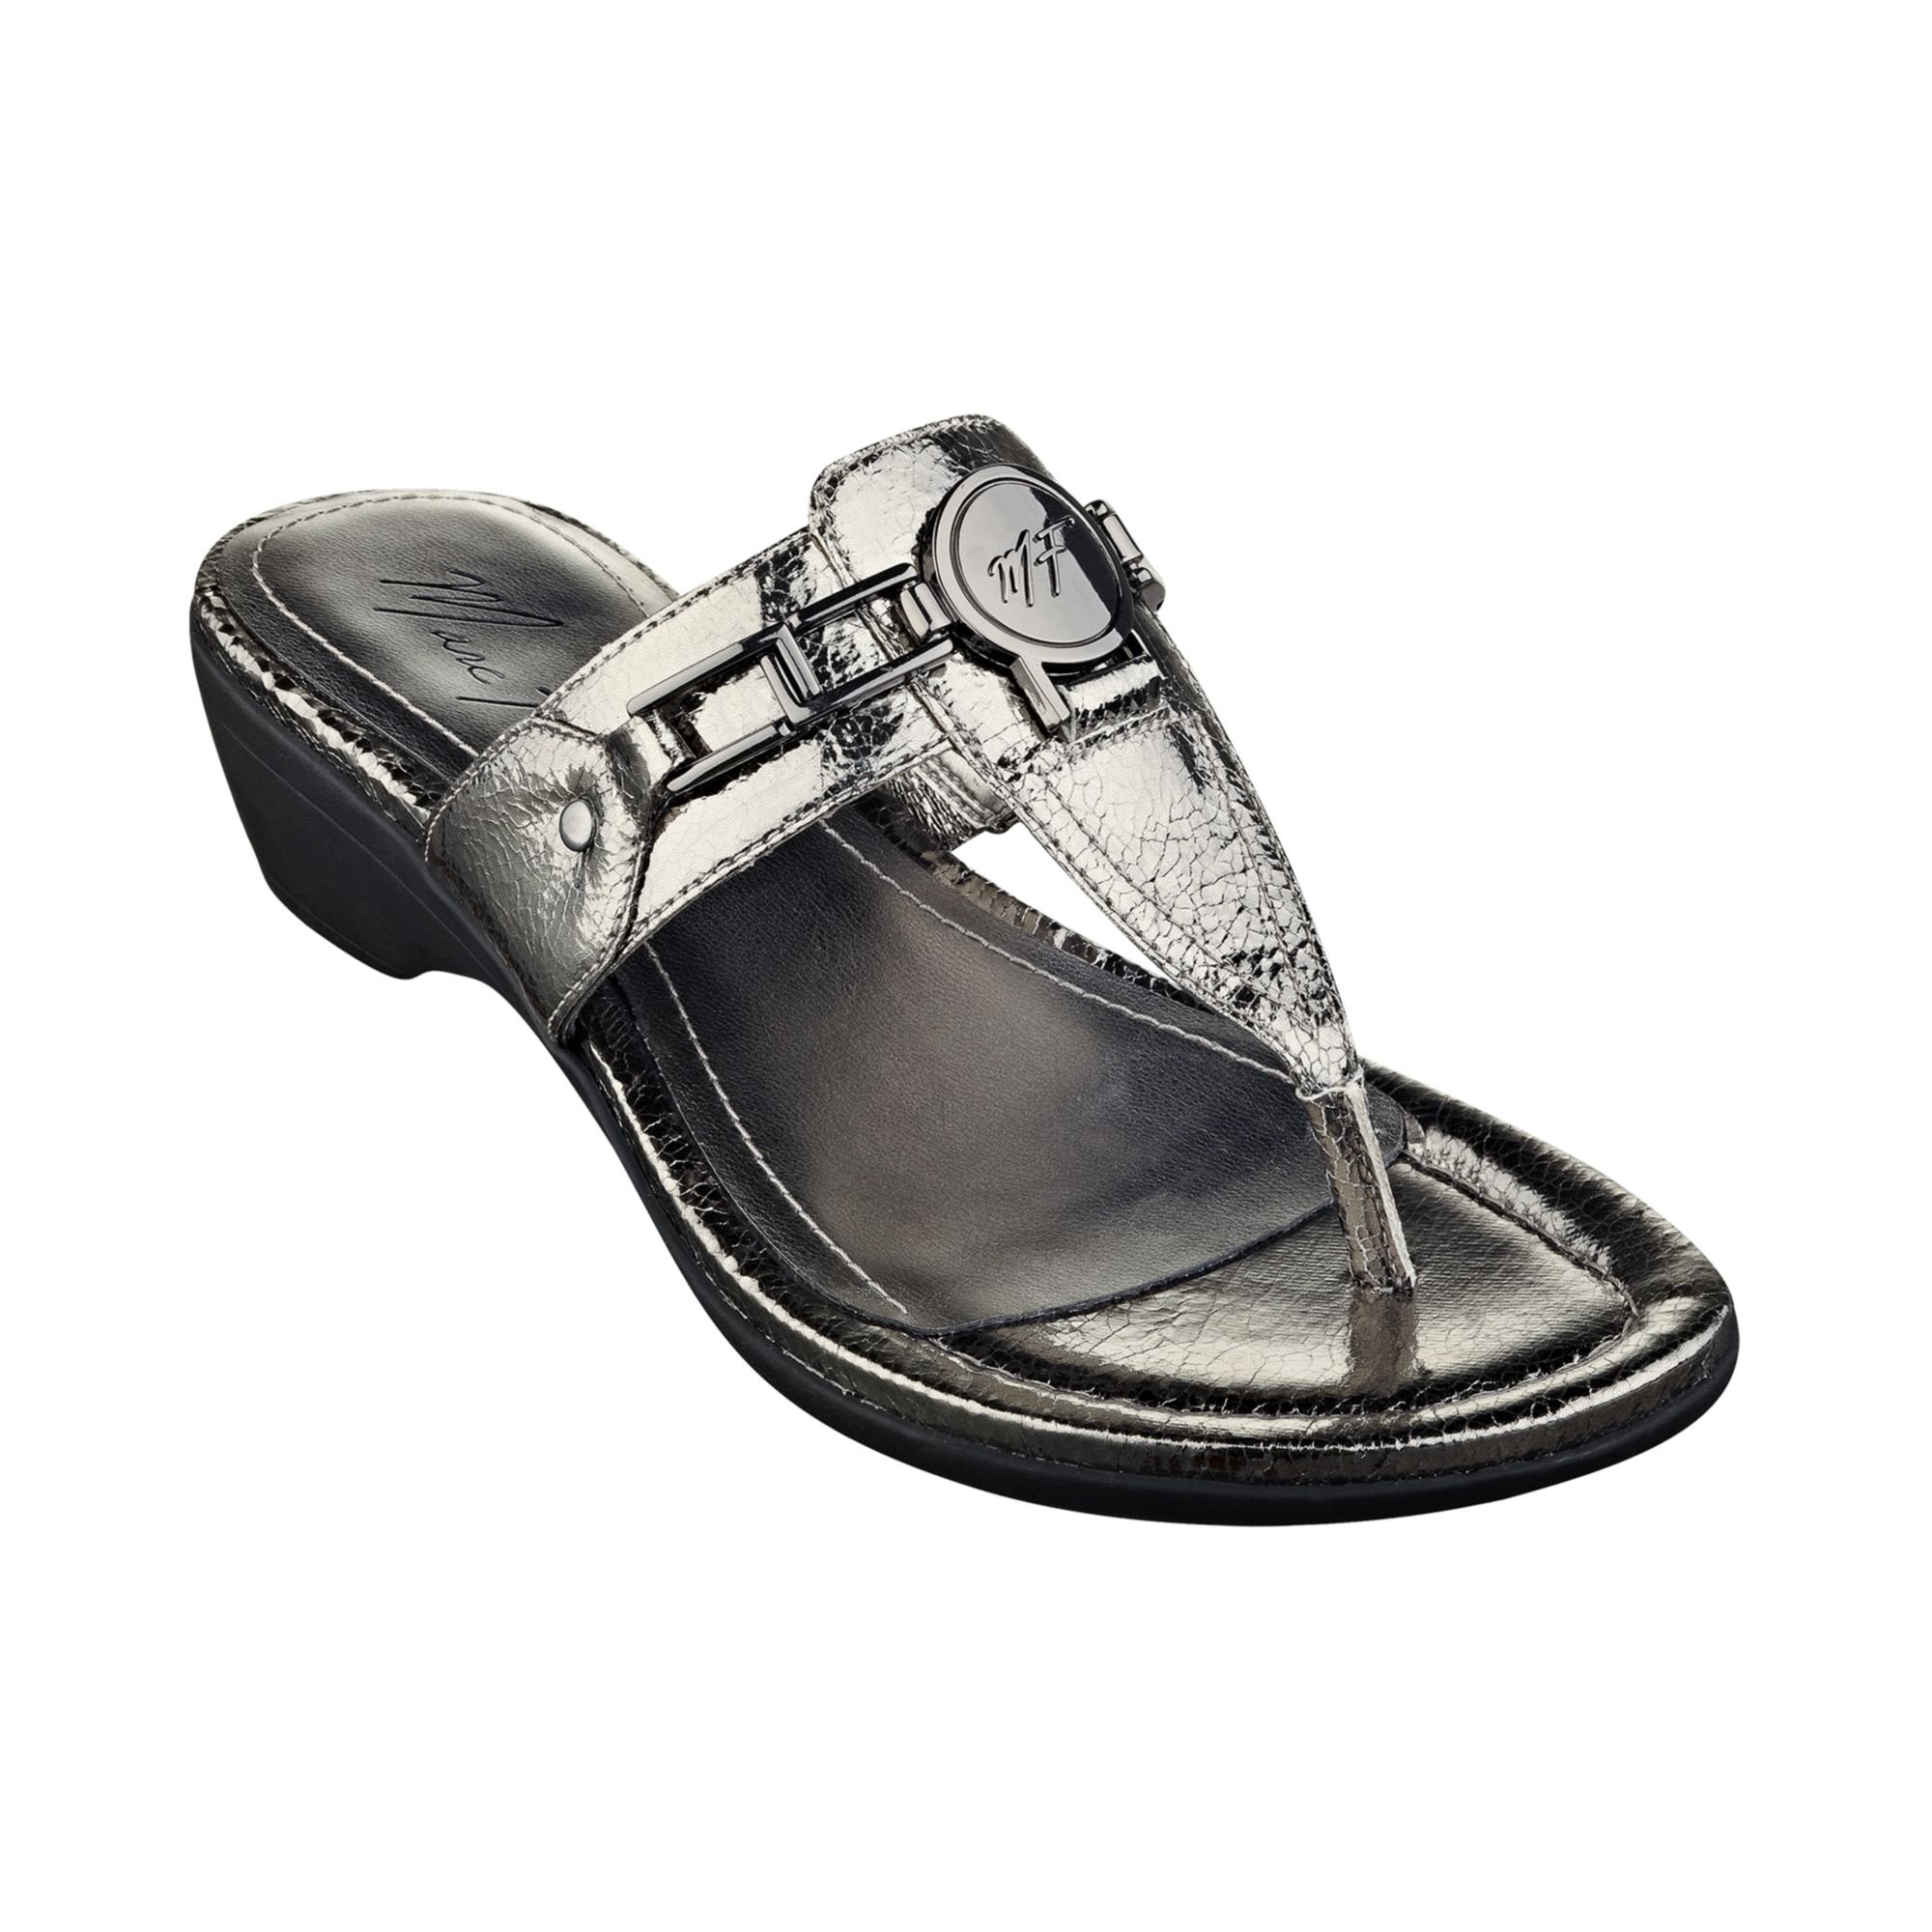 Marc Fisher Amina Thong Sandals in Silver (Silver Crackle